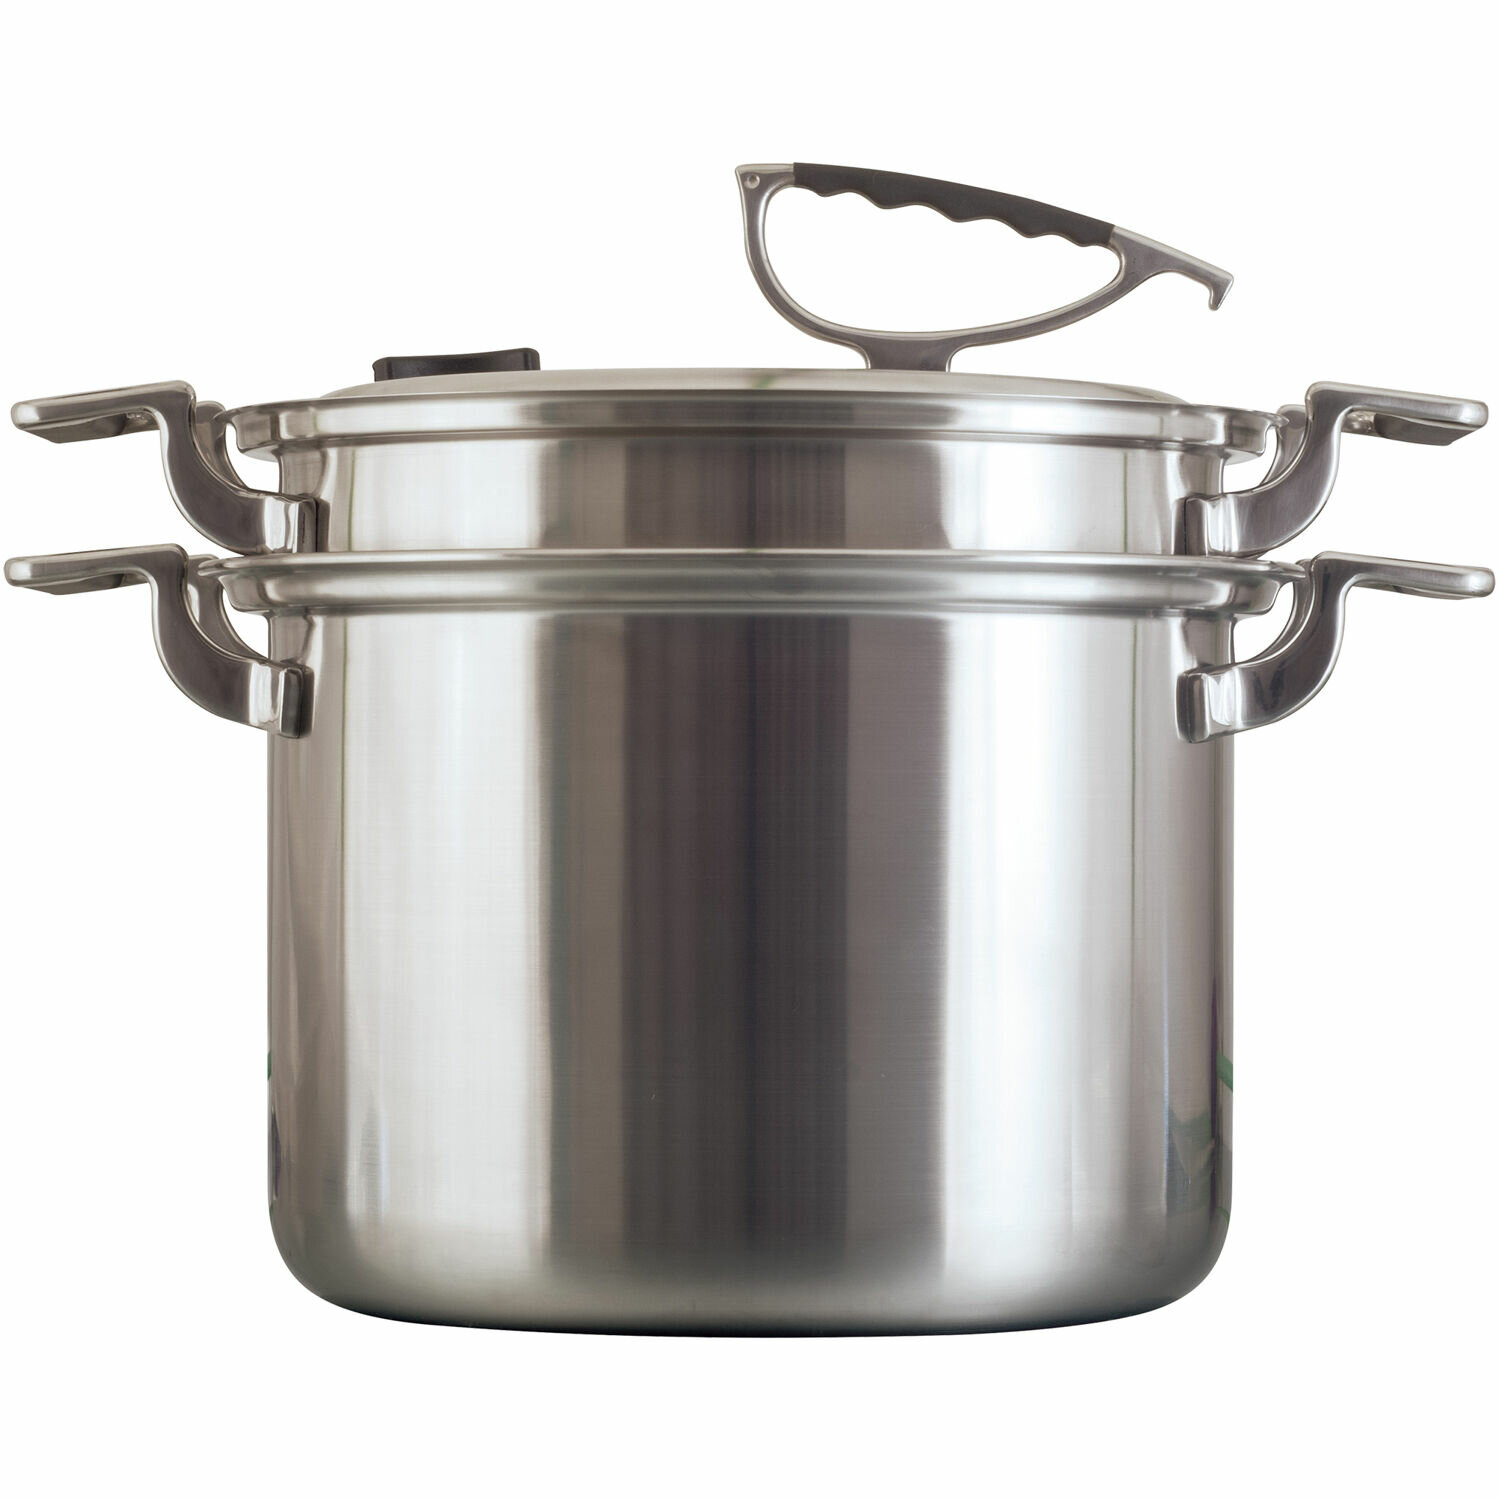 Calphalon CLOSEOUT! Tri-Ply Stainless Steel 8 Qt. Covered Stockpot - Macy's